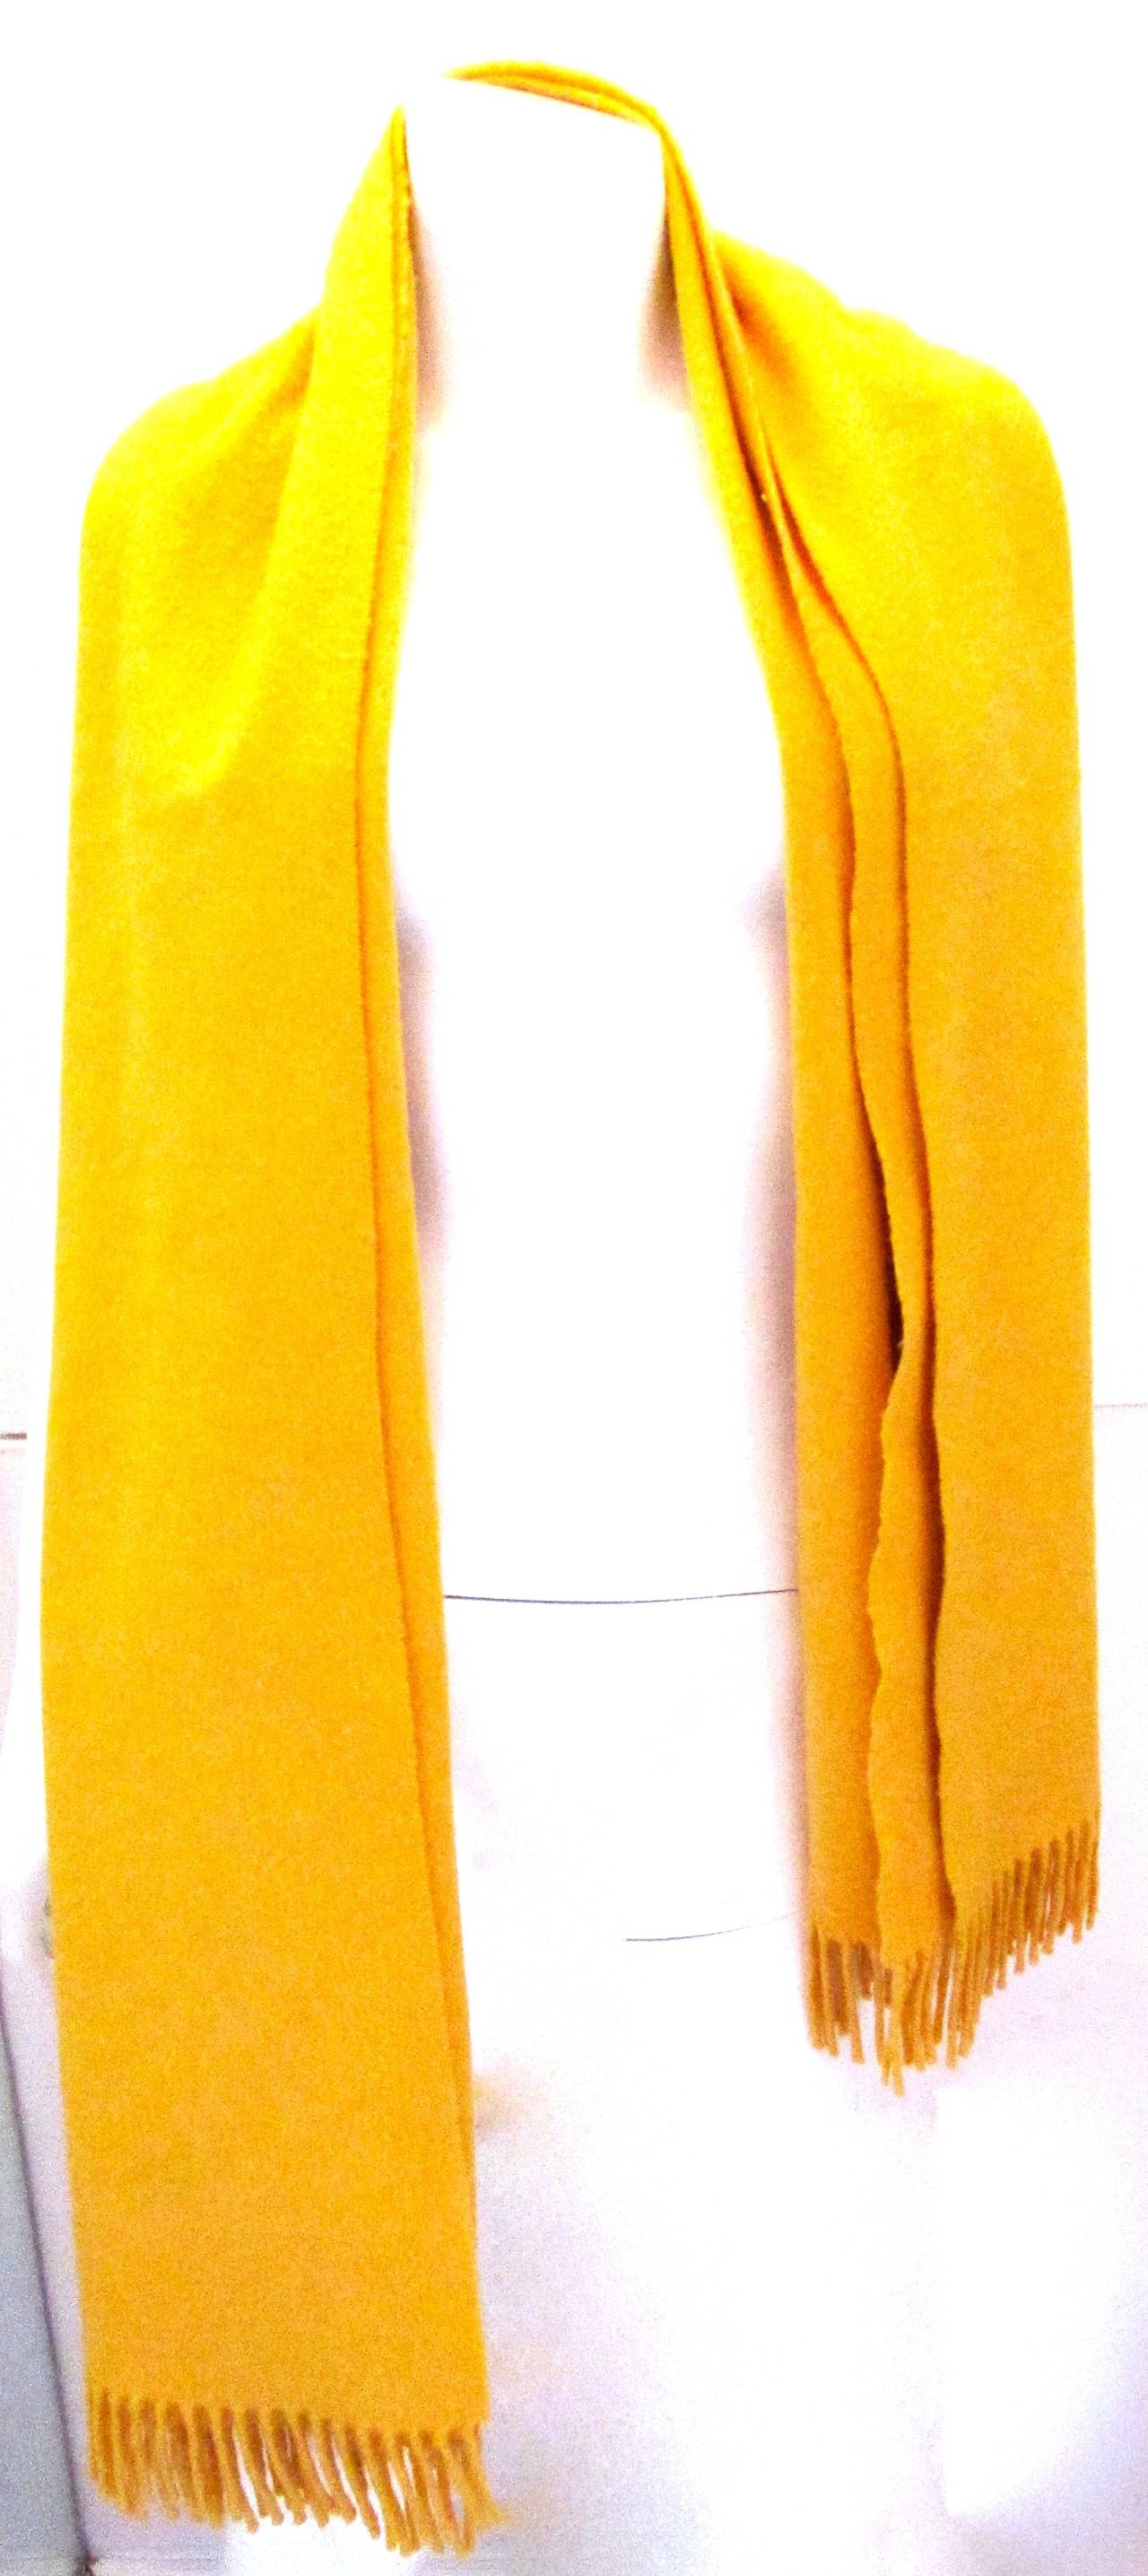 Hermes Cashmere Scarf / Shawl. Shawl is made of 100% cashmere.  Shawl is in near perfect condition and is a beautiful shade of yellow. Shawl is made in Scotland. Can be used as a scarf of full shawl or as a blanket for indoor use. Finely crafted